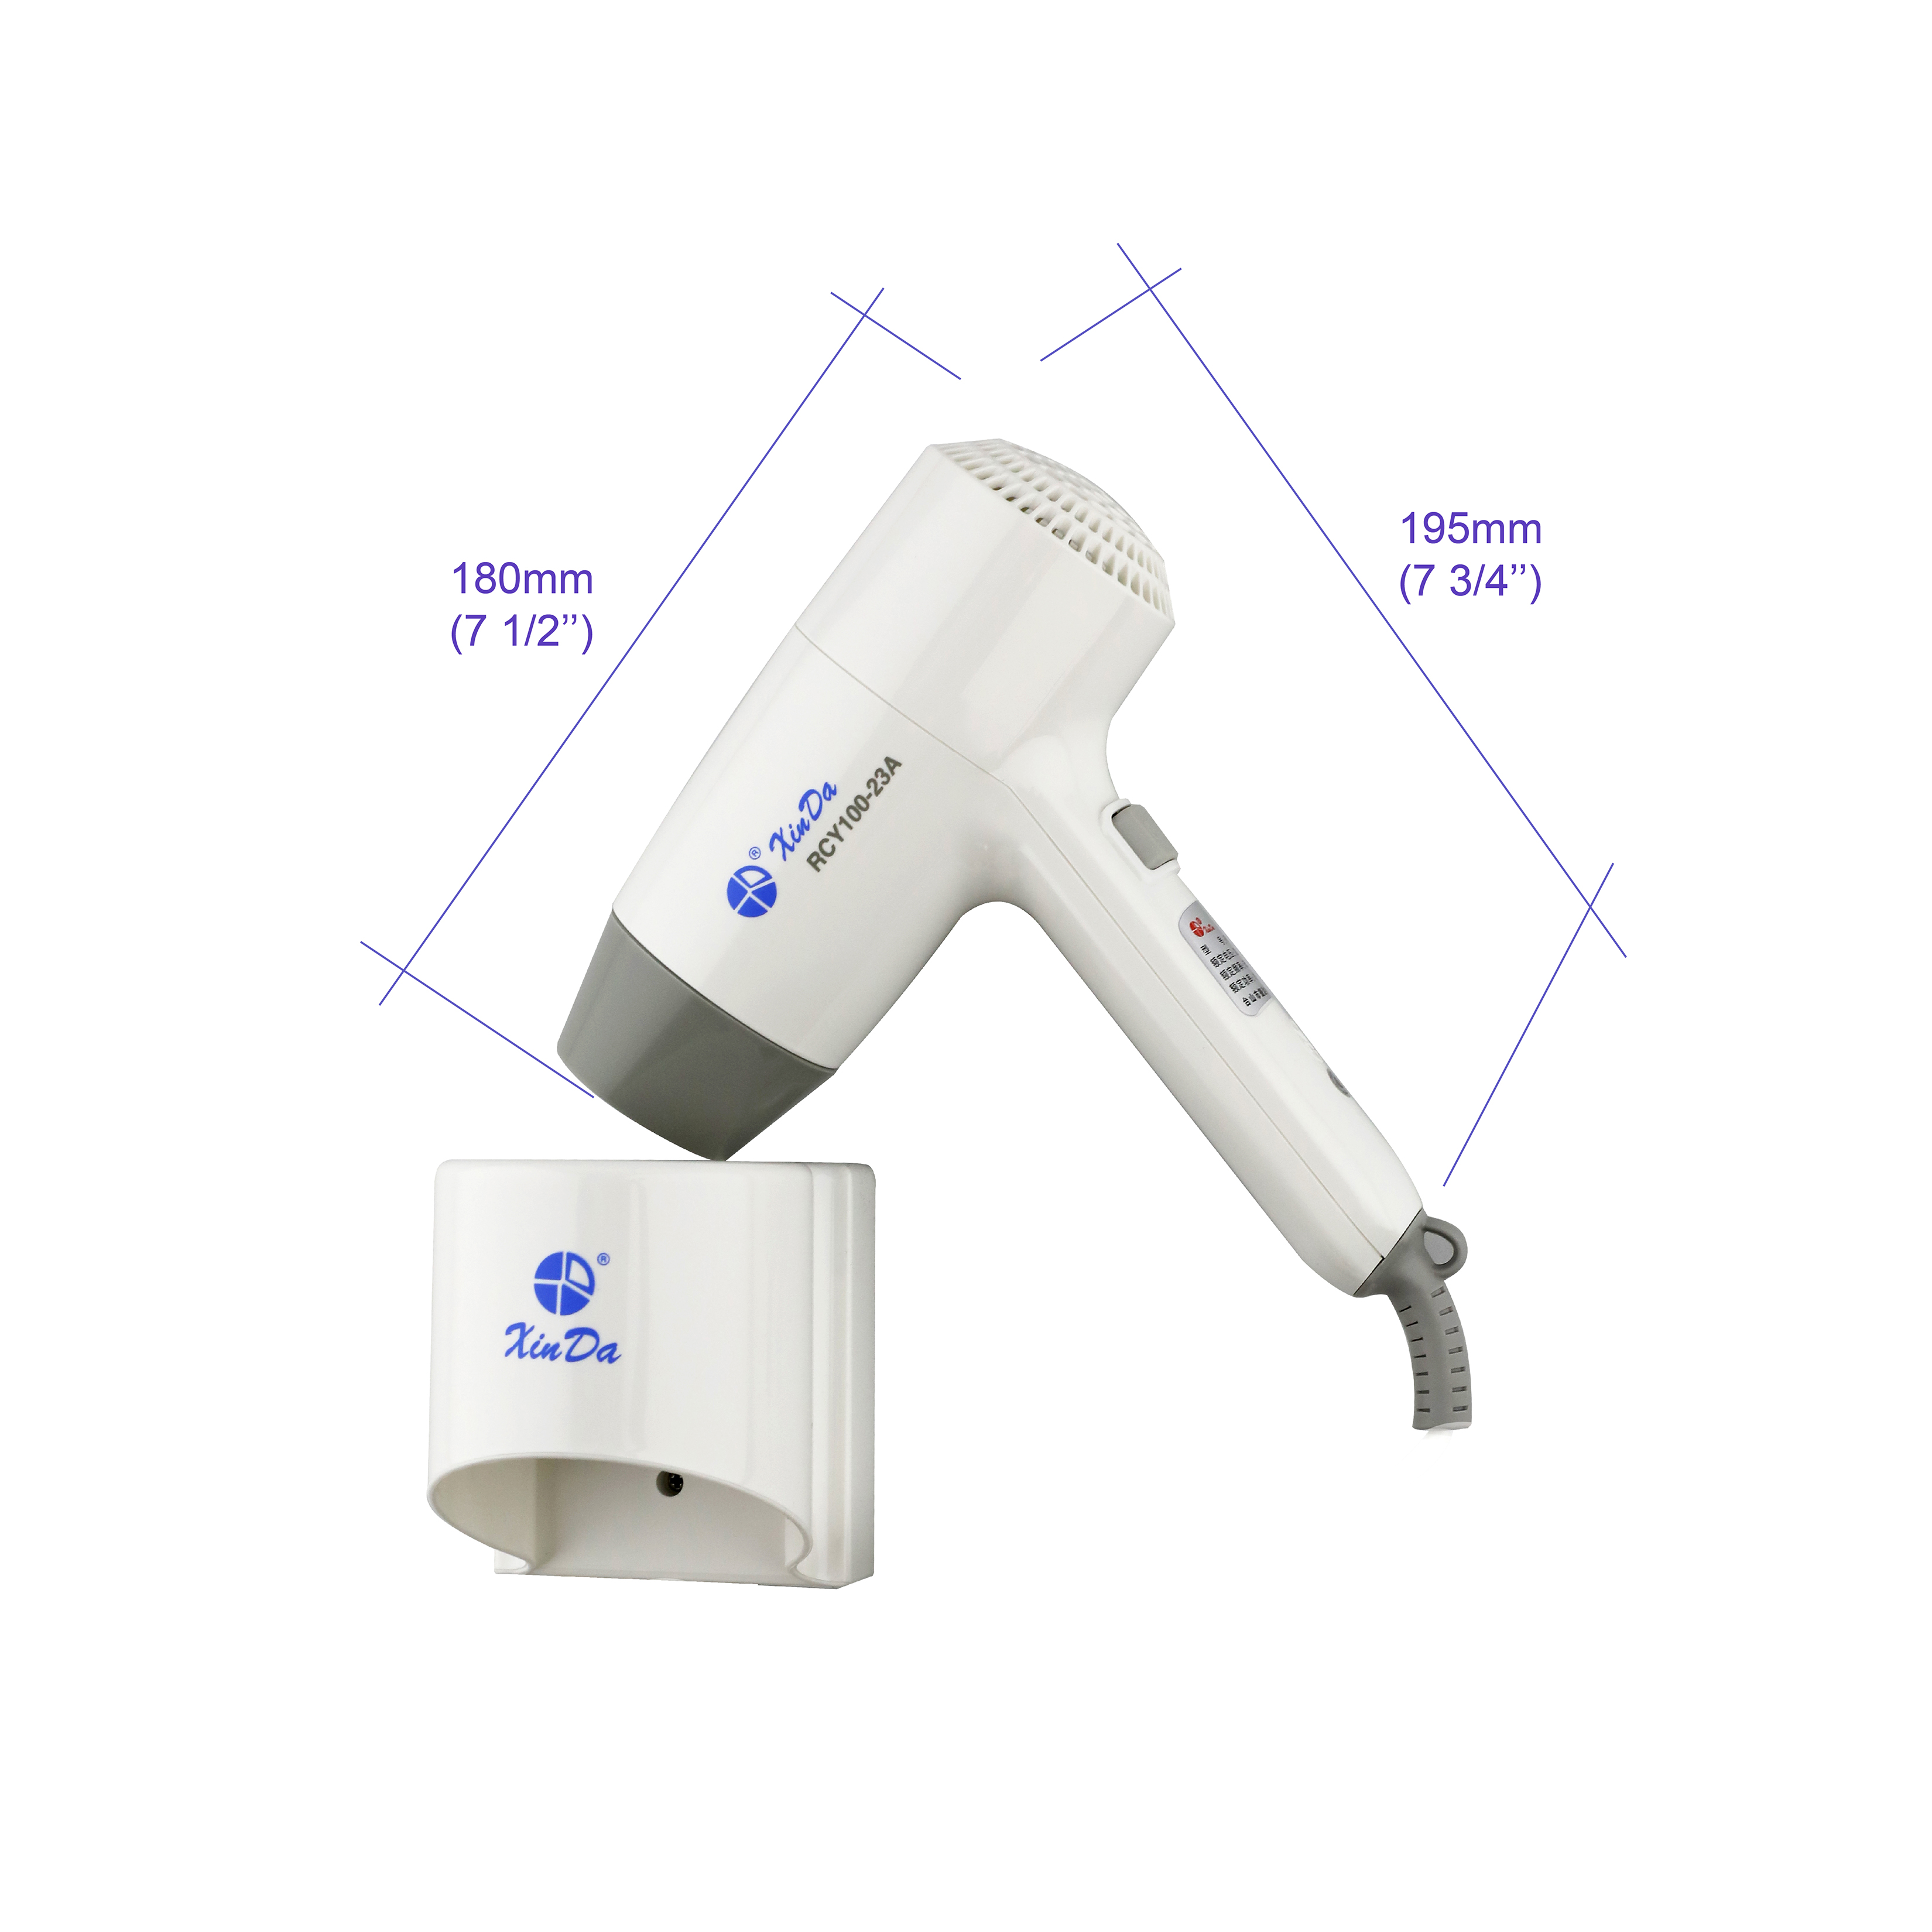 The XINDA RCY-100 23A Color Logo Customized Wall Mounted Hotel Hair Dryer